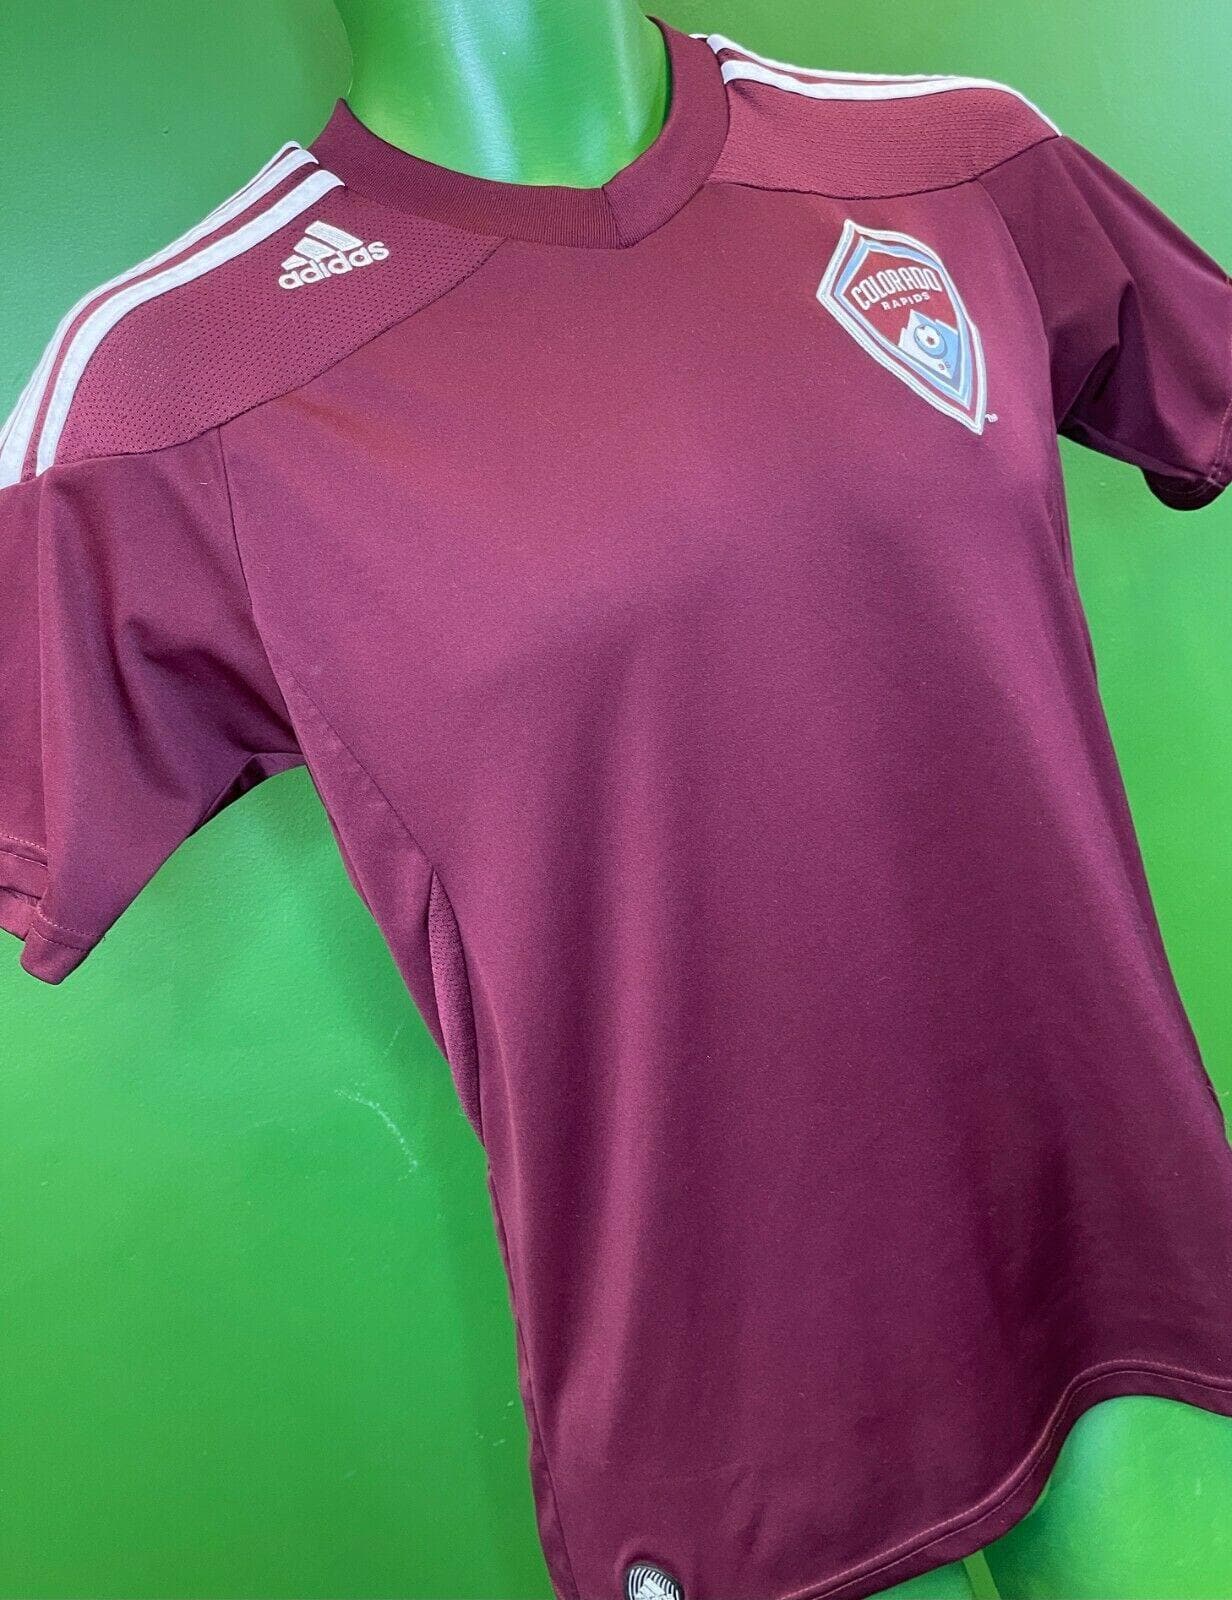 MLS Colorado Rapids Adidas Jersey Stitched Youth Small 6-8